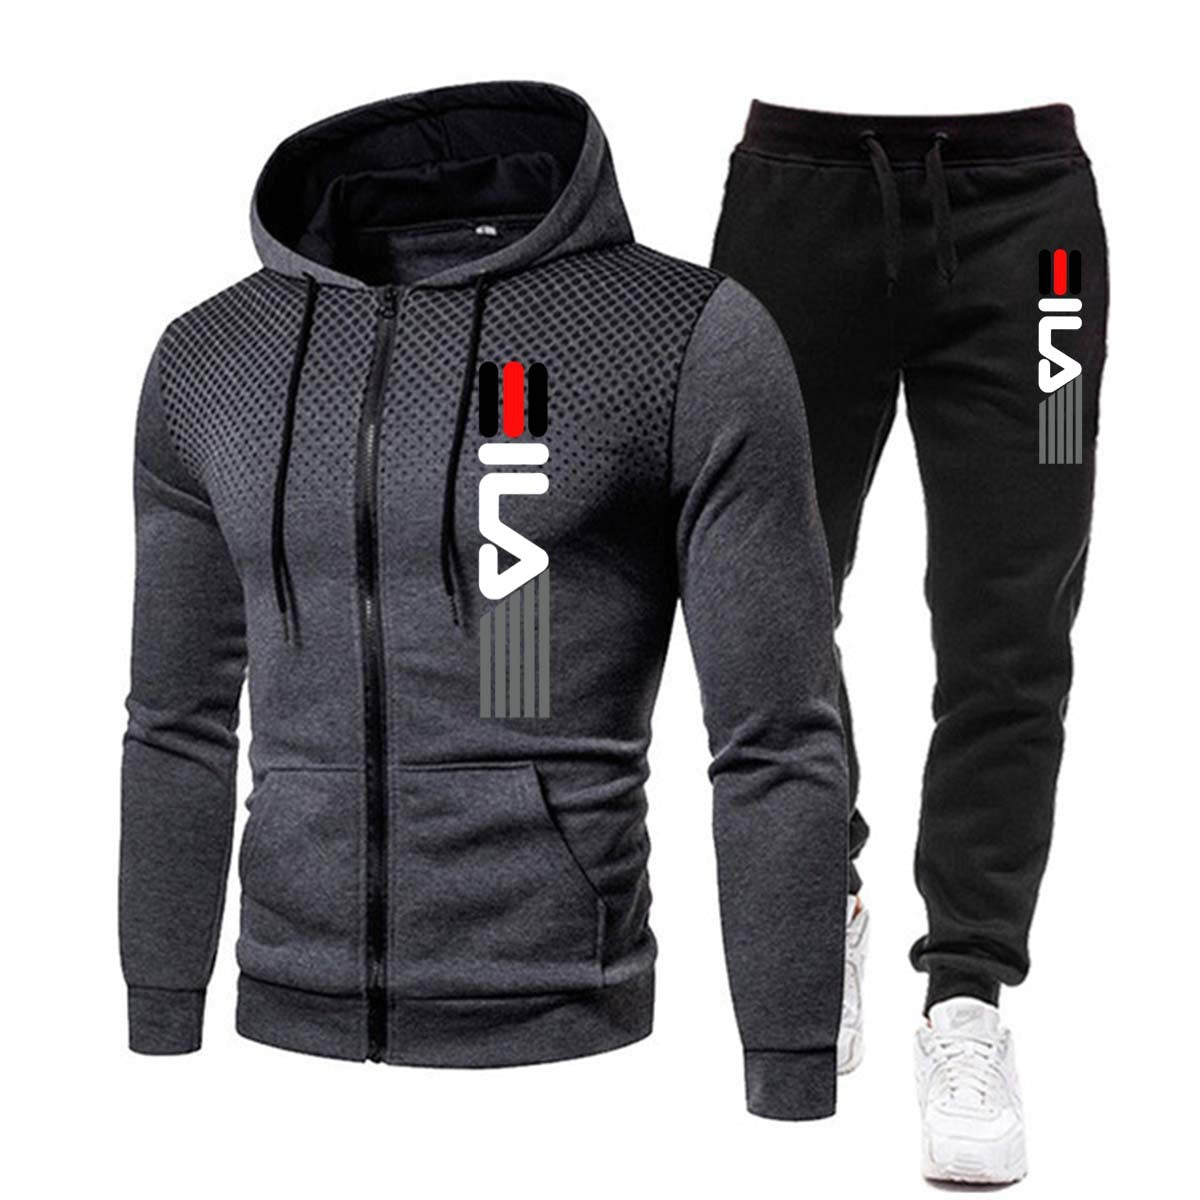 Autumn And Winter New European And American Fleece Sweater Sweatpants Men's Casual Sports Hooded Suit